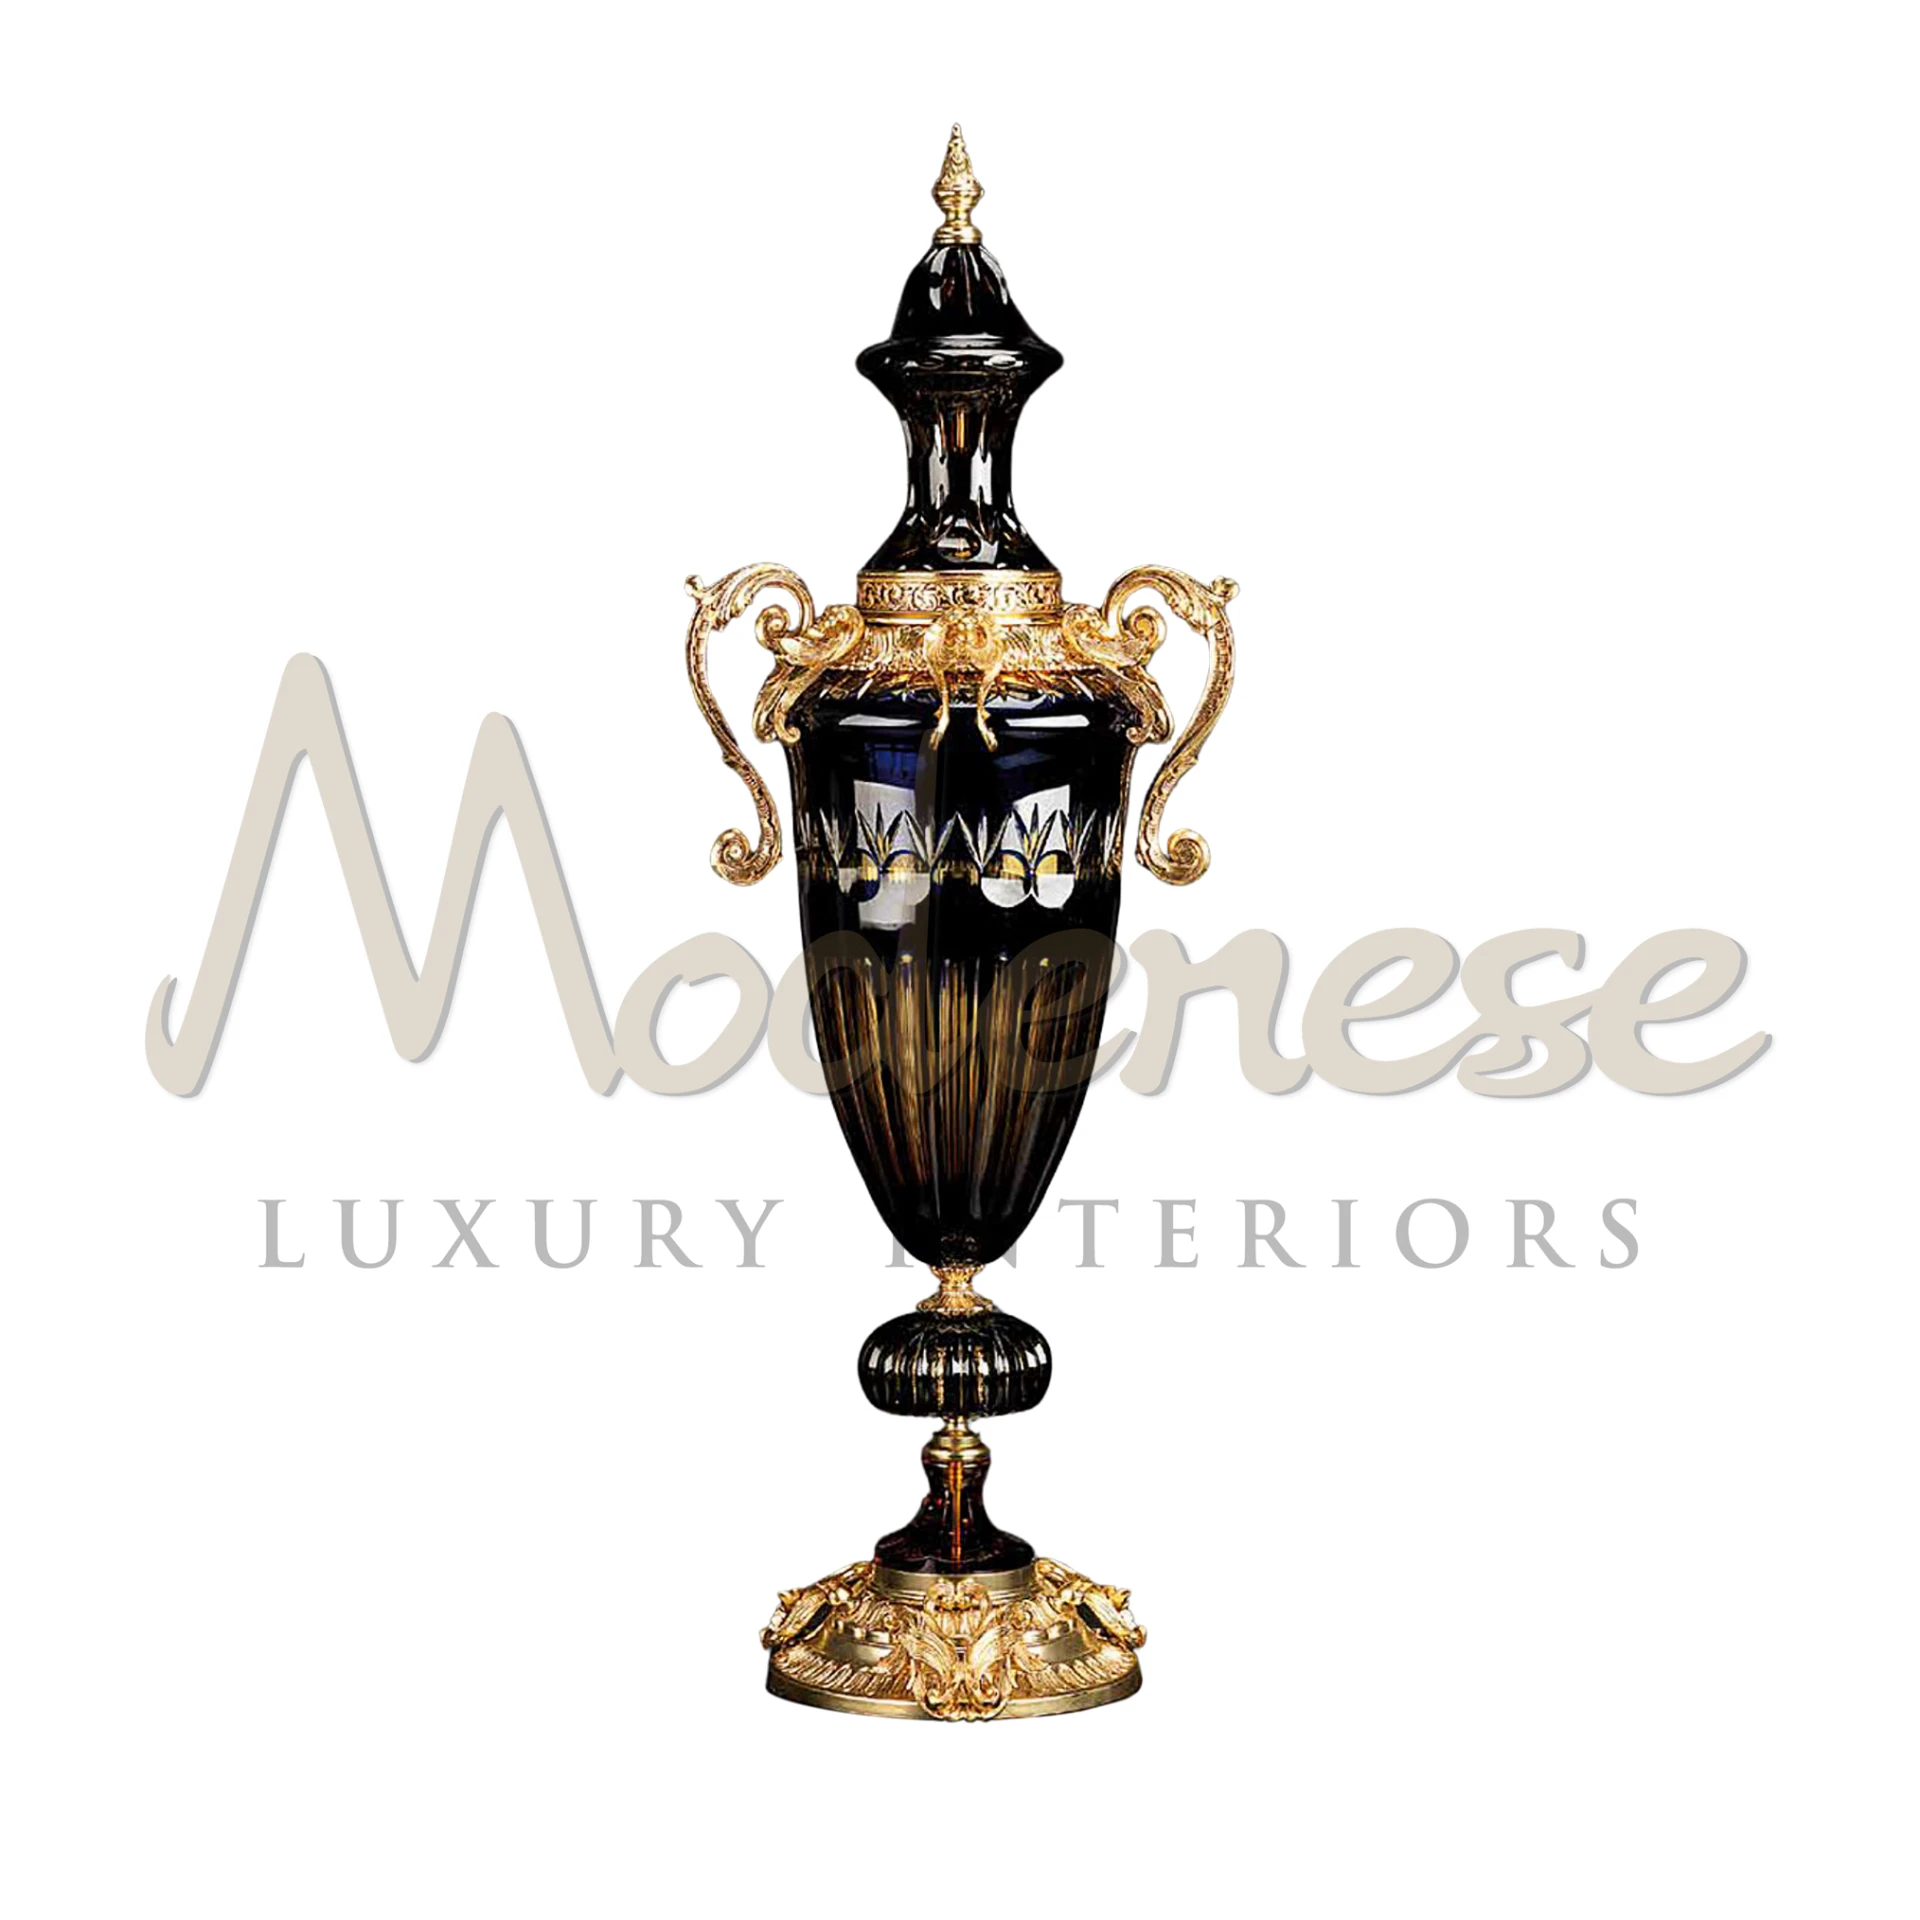 Classical Italian Tall Amphora by Modenese, melding ancient grace with Italian elegance, ideal for sophisticated luxury interiors.